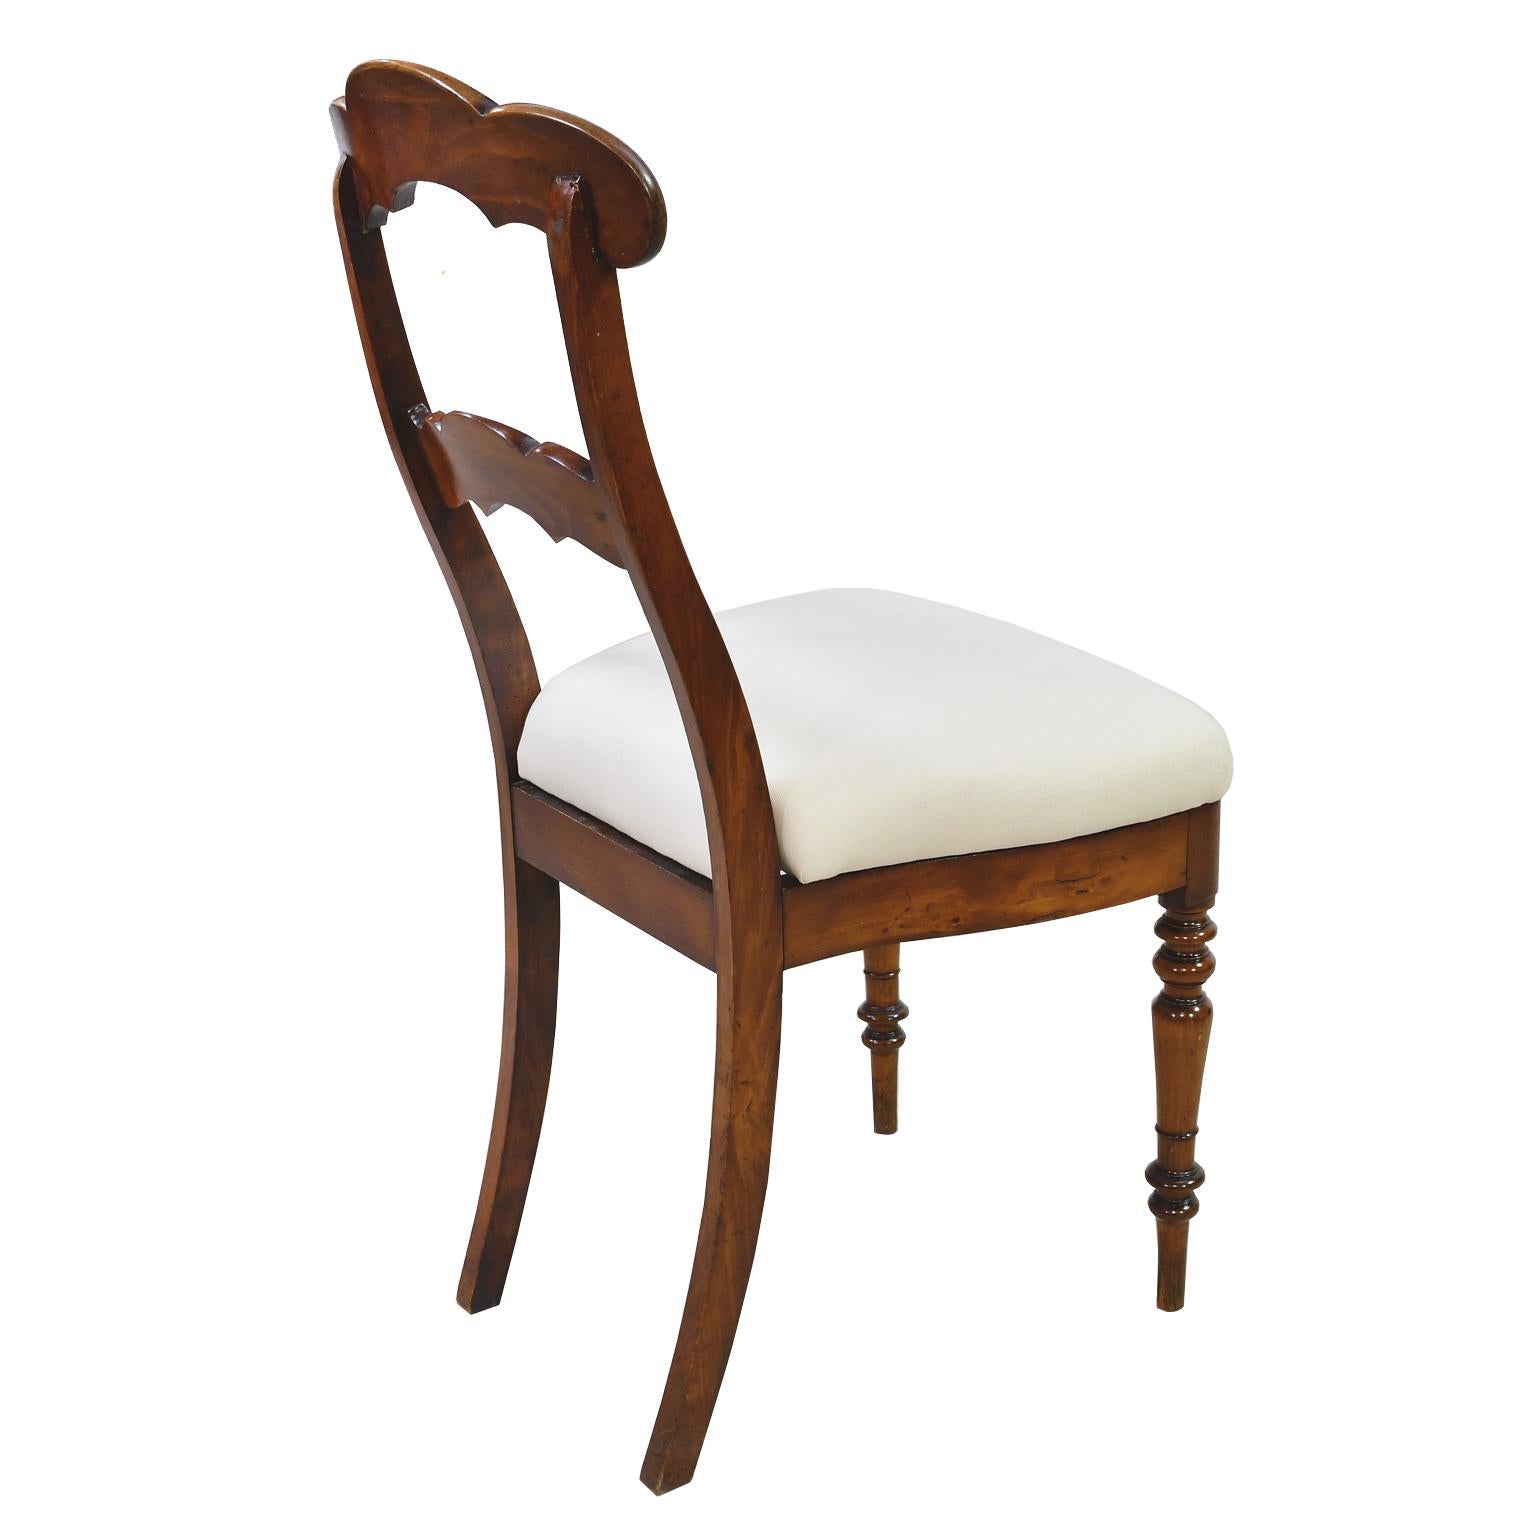 Mid-19th Century Set of 4 Biedermeier Mahogany Dining Chairs with Upholstered Seat, circa 1830